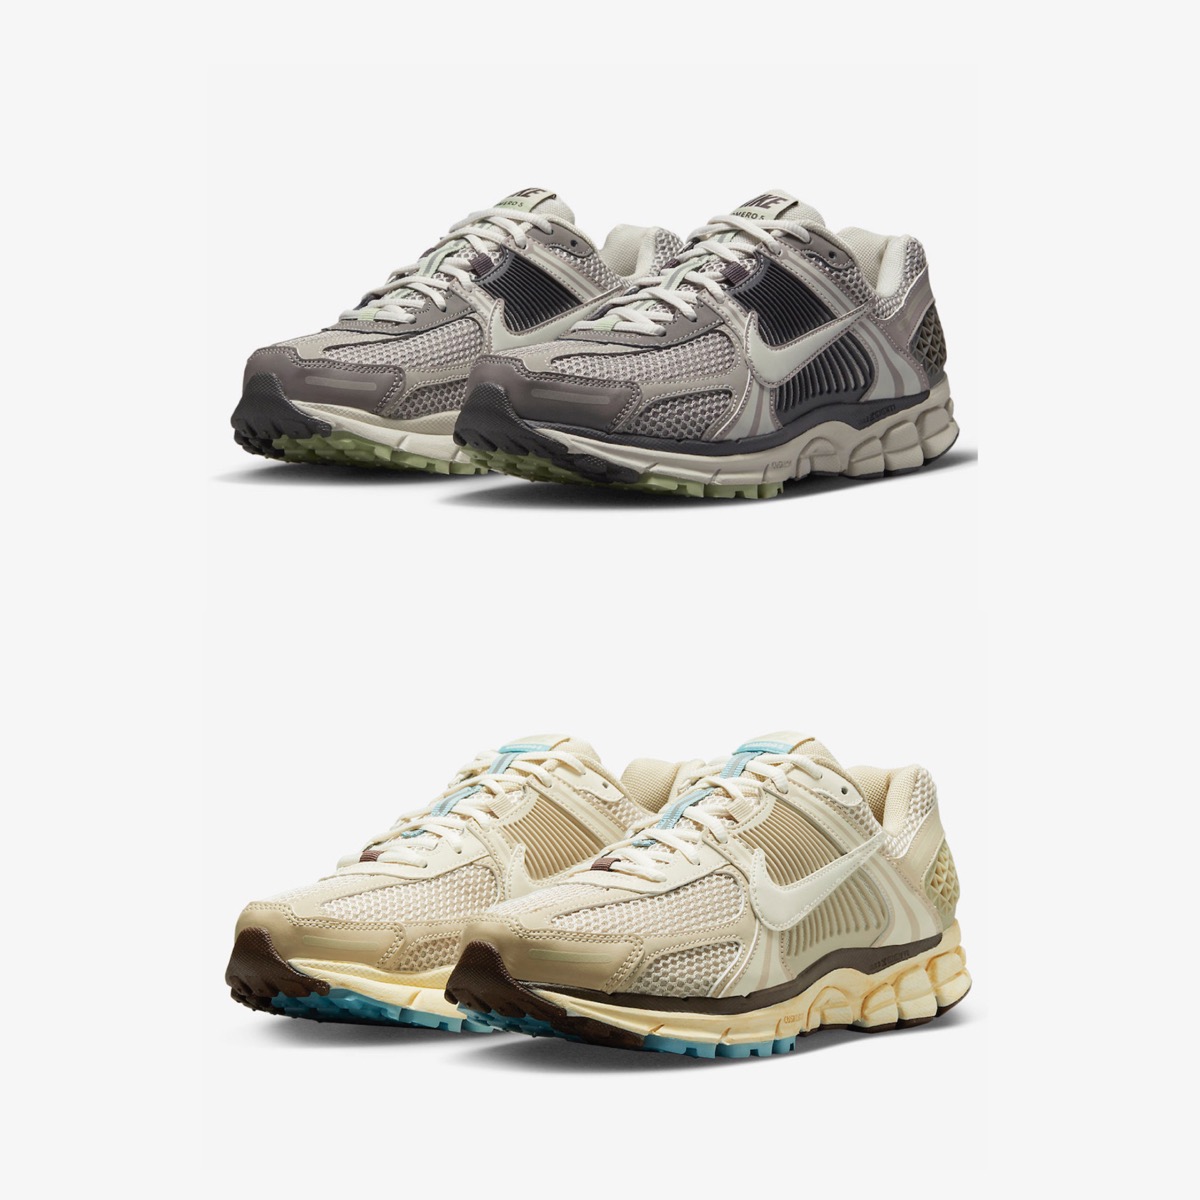 Nike Wmns Zoom Vomero 5 “Cobblestone”  “Oatmeal”が国内10月28日より発売 ［FB8825-001  / FB8825-111］ | UP TO DATE